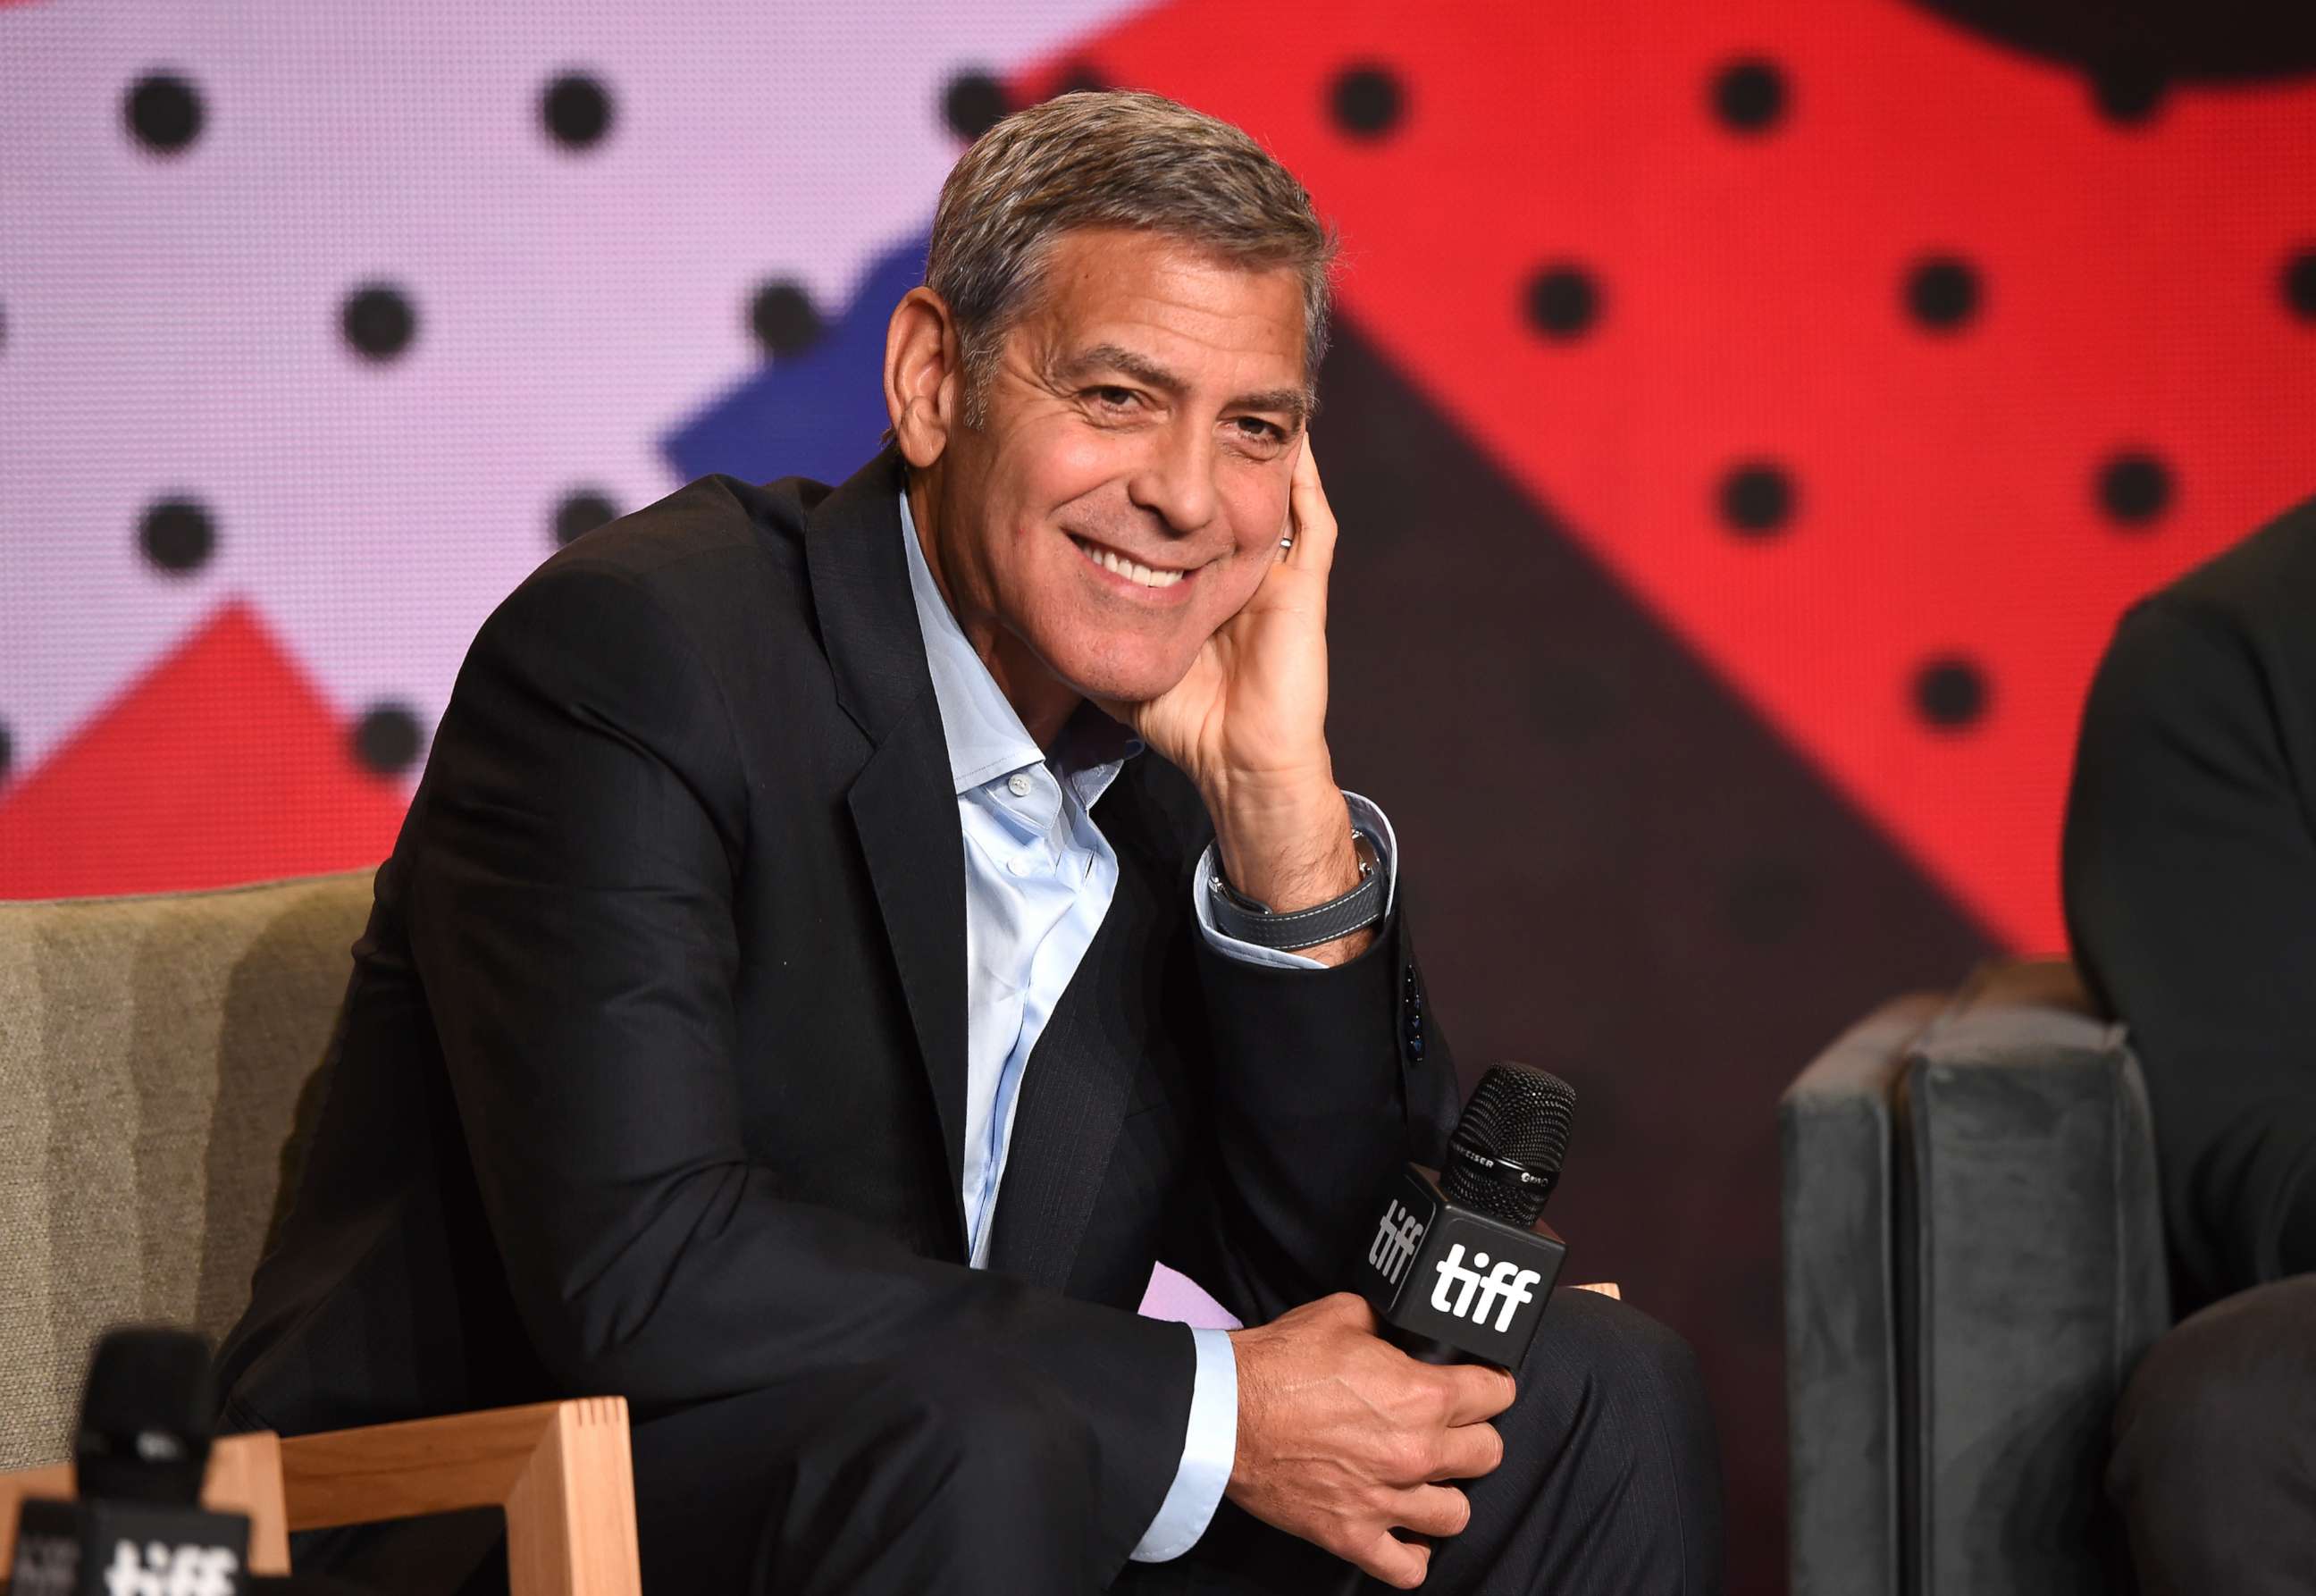 PHOTO: George Clooney speaks onstage at the "Suburbicon" press conference during the 2017 Toronto International Film Festival at TIFF Bell Lightbox, Sept. 10, 2017 in Toronto.